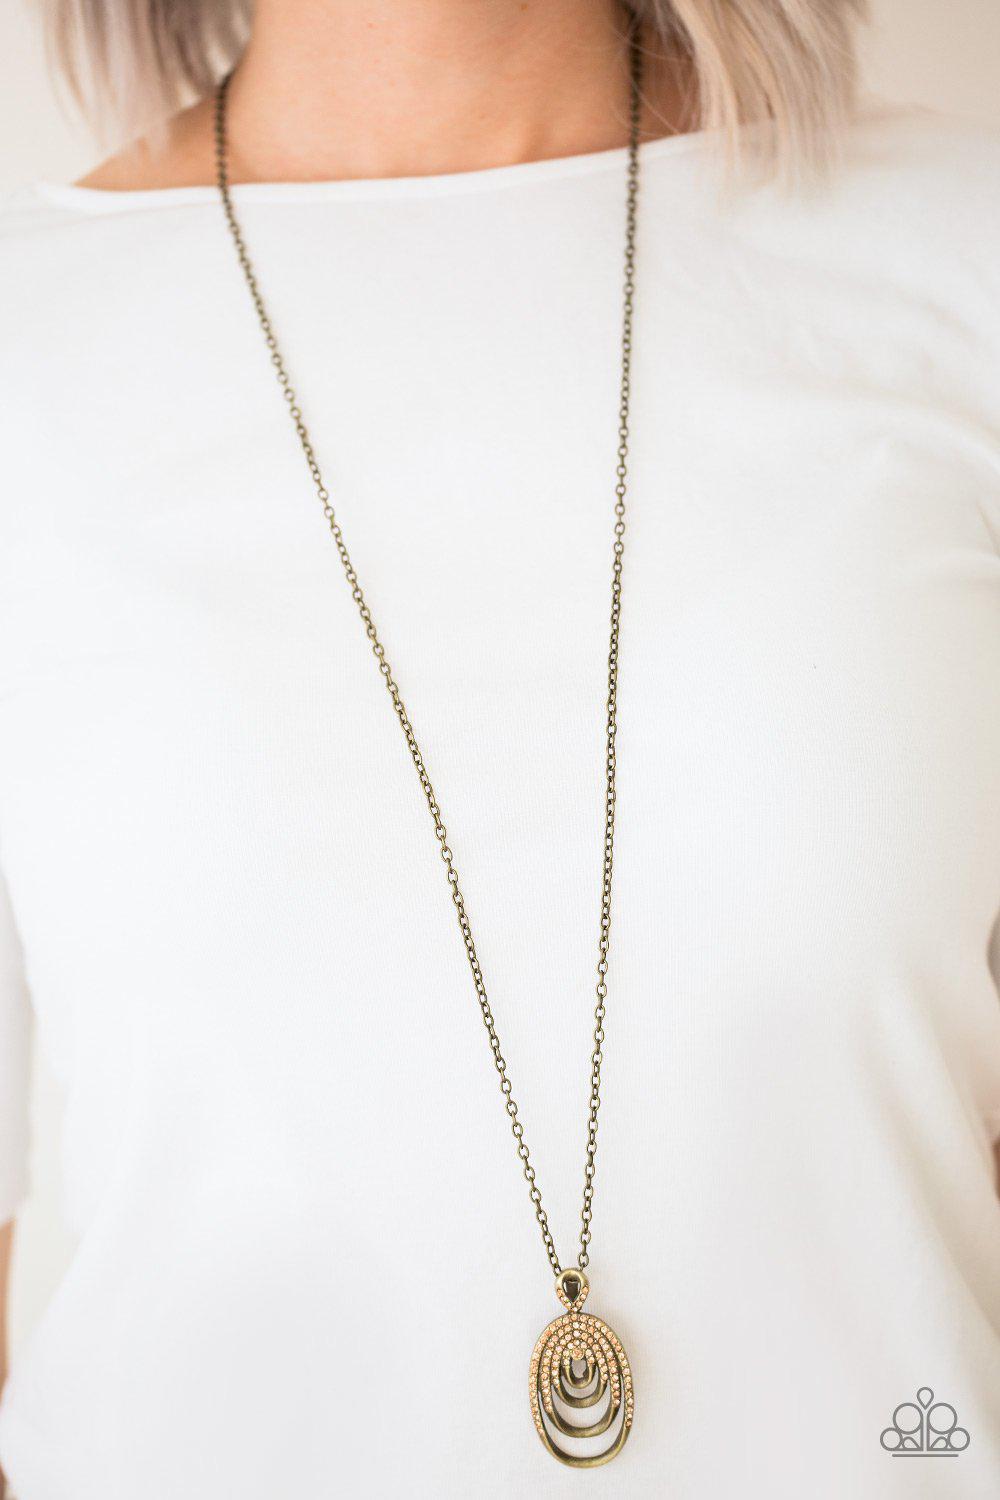 The Heiress Brass Necklace - Paparazzi Accessories-CarasShop.com - $5 Jewelry by Cara Jewels